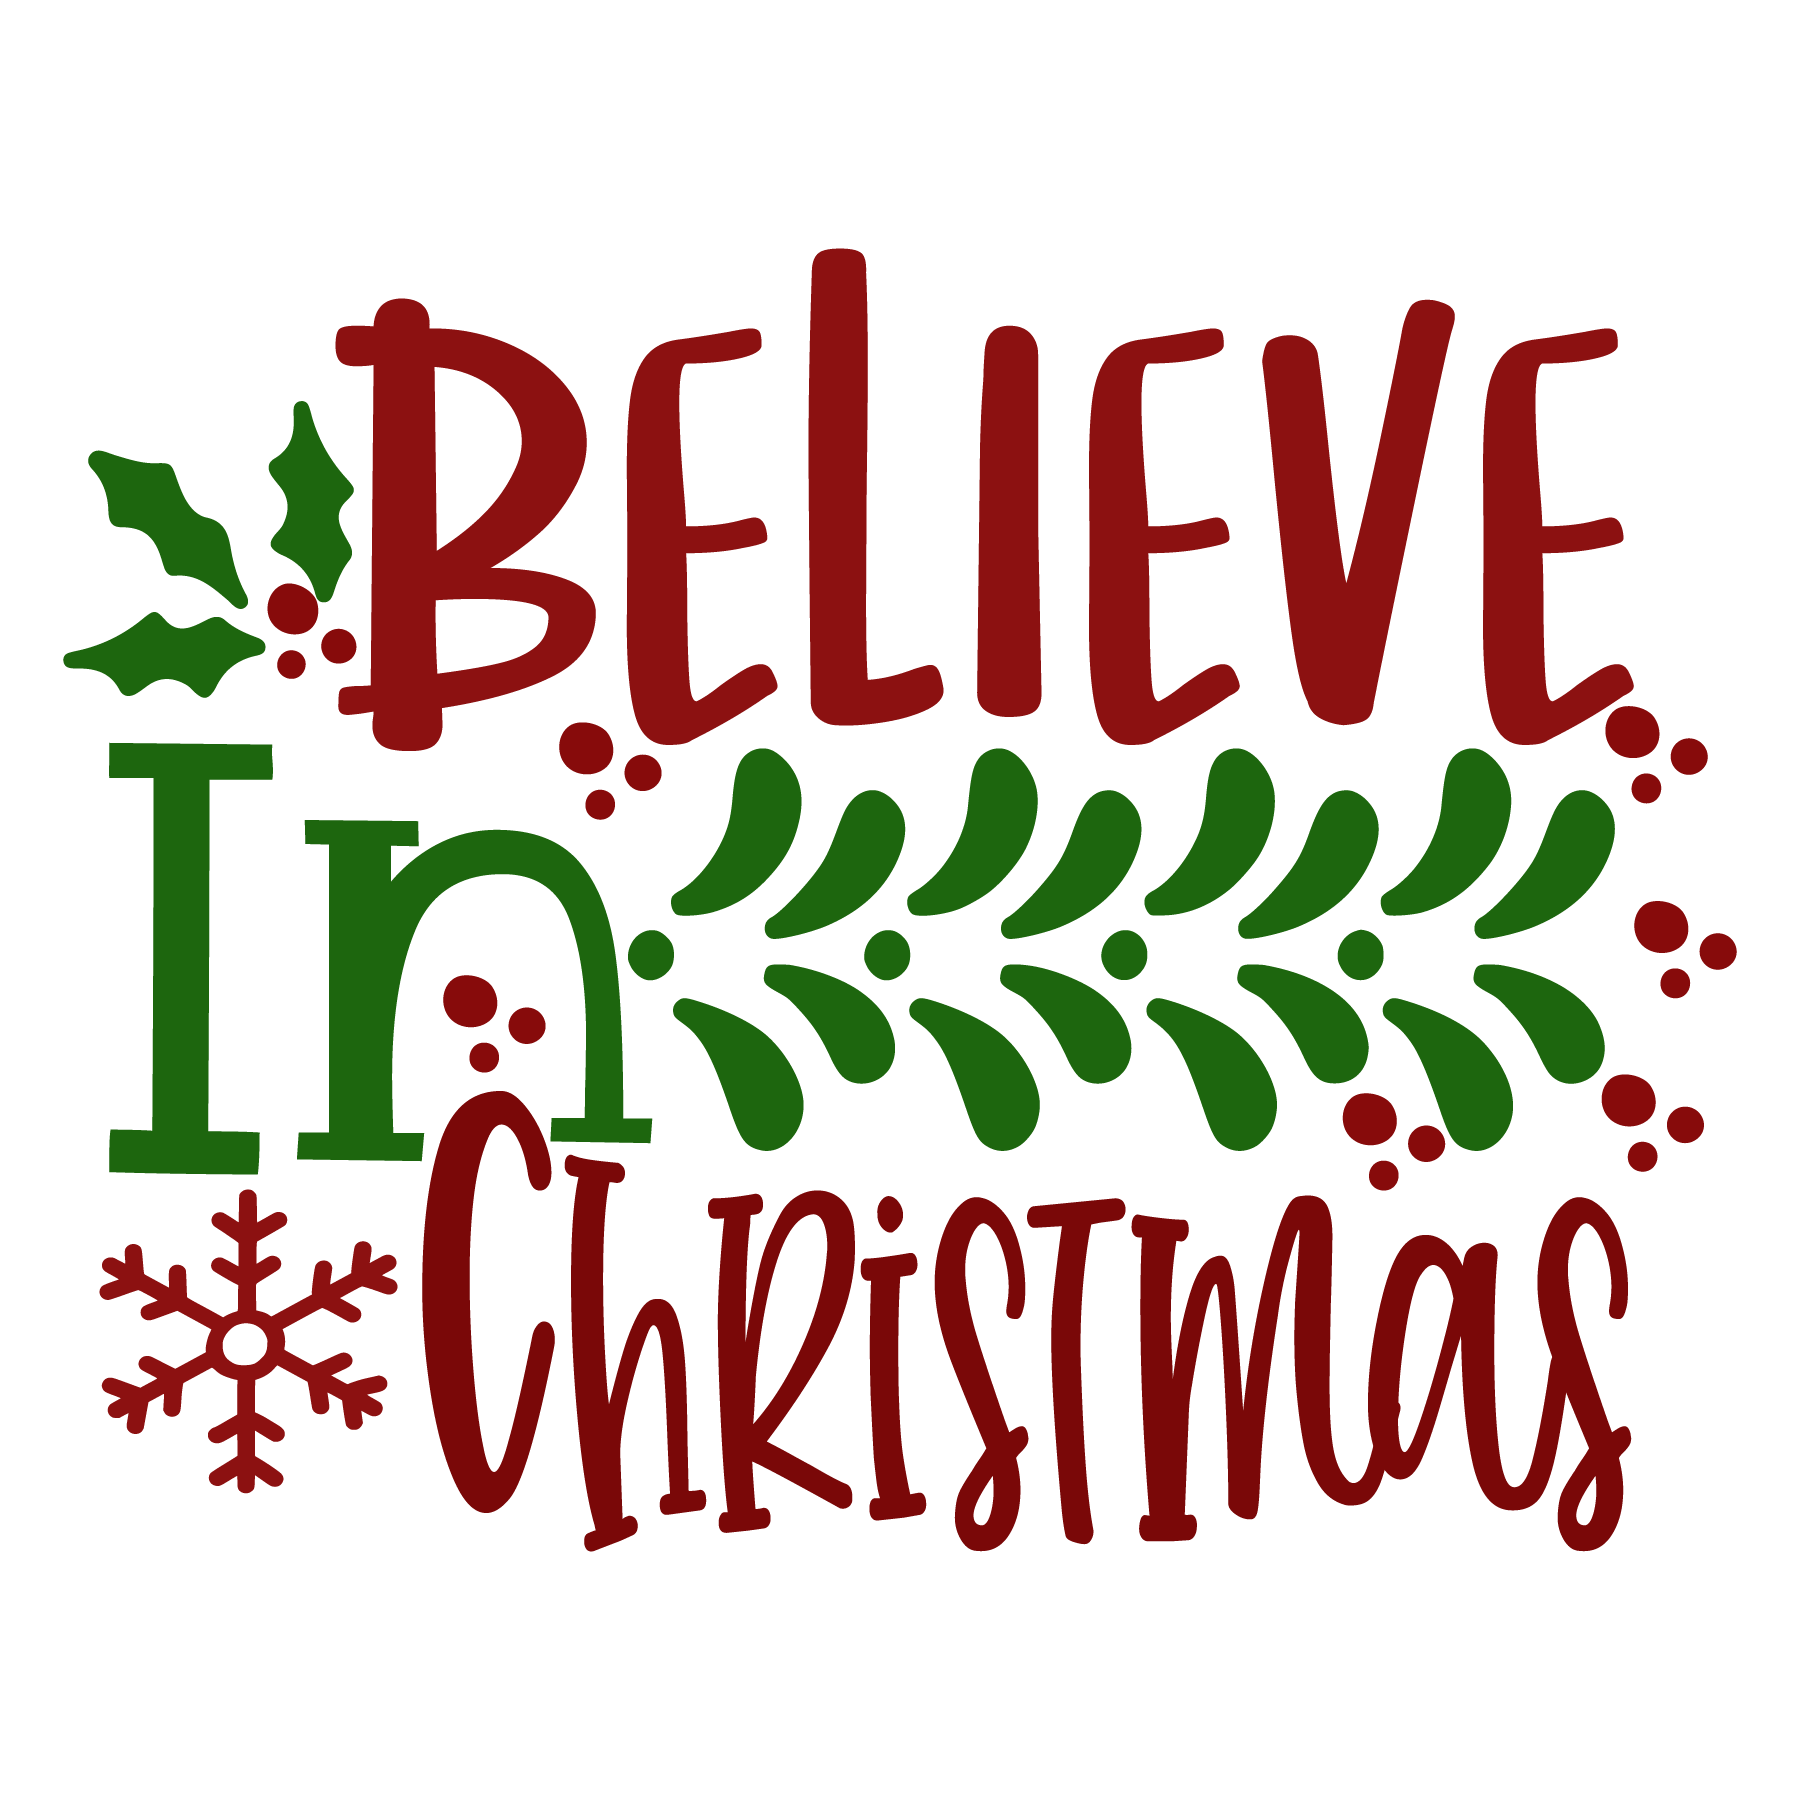 Download Believe in Christmas Quote SVG File Free PSD Mockups